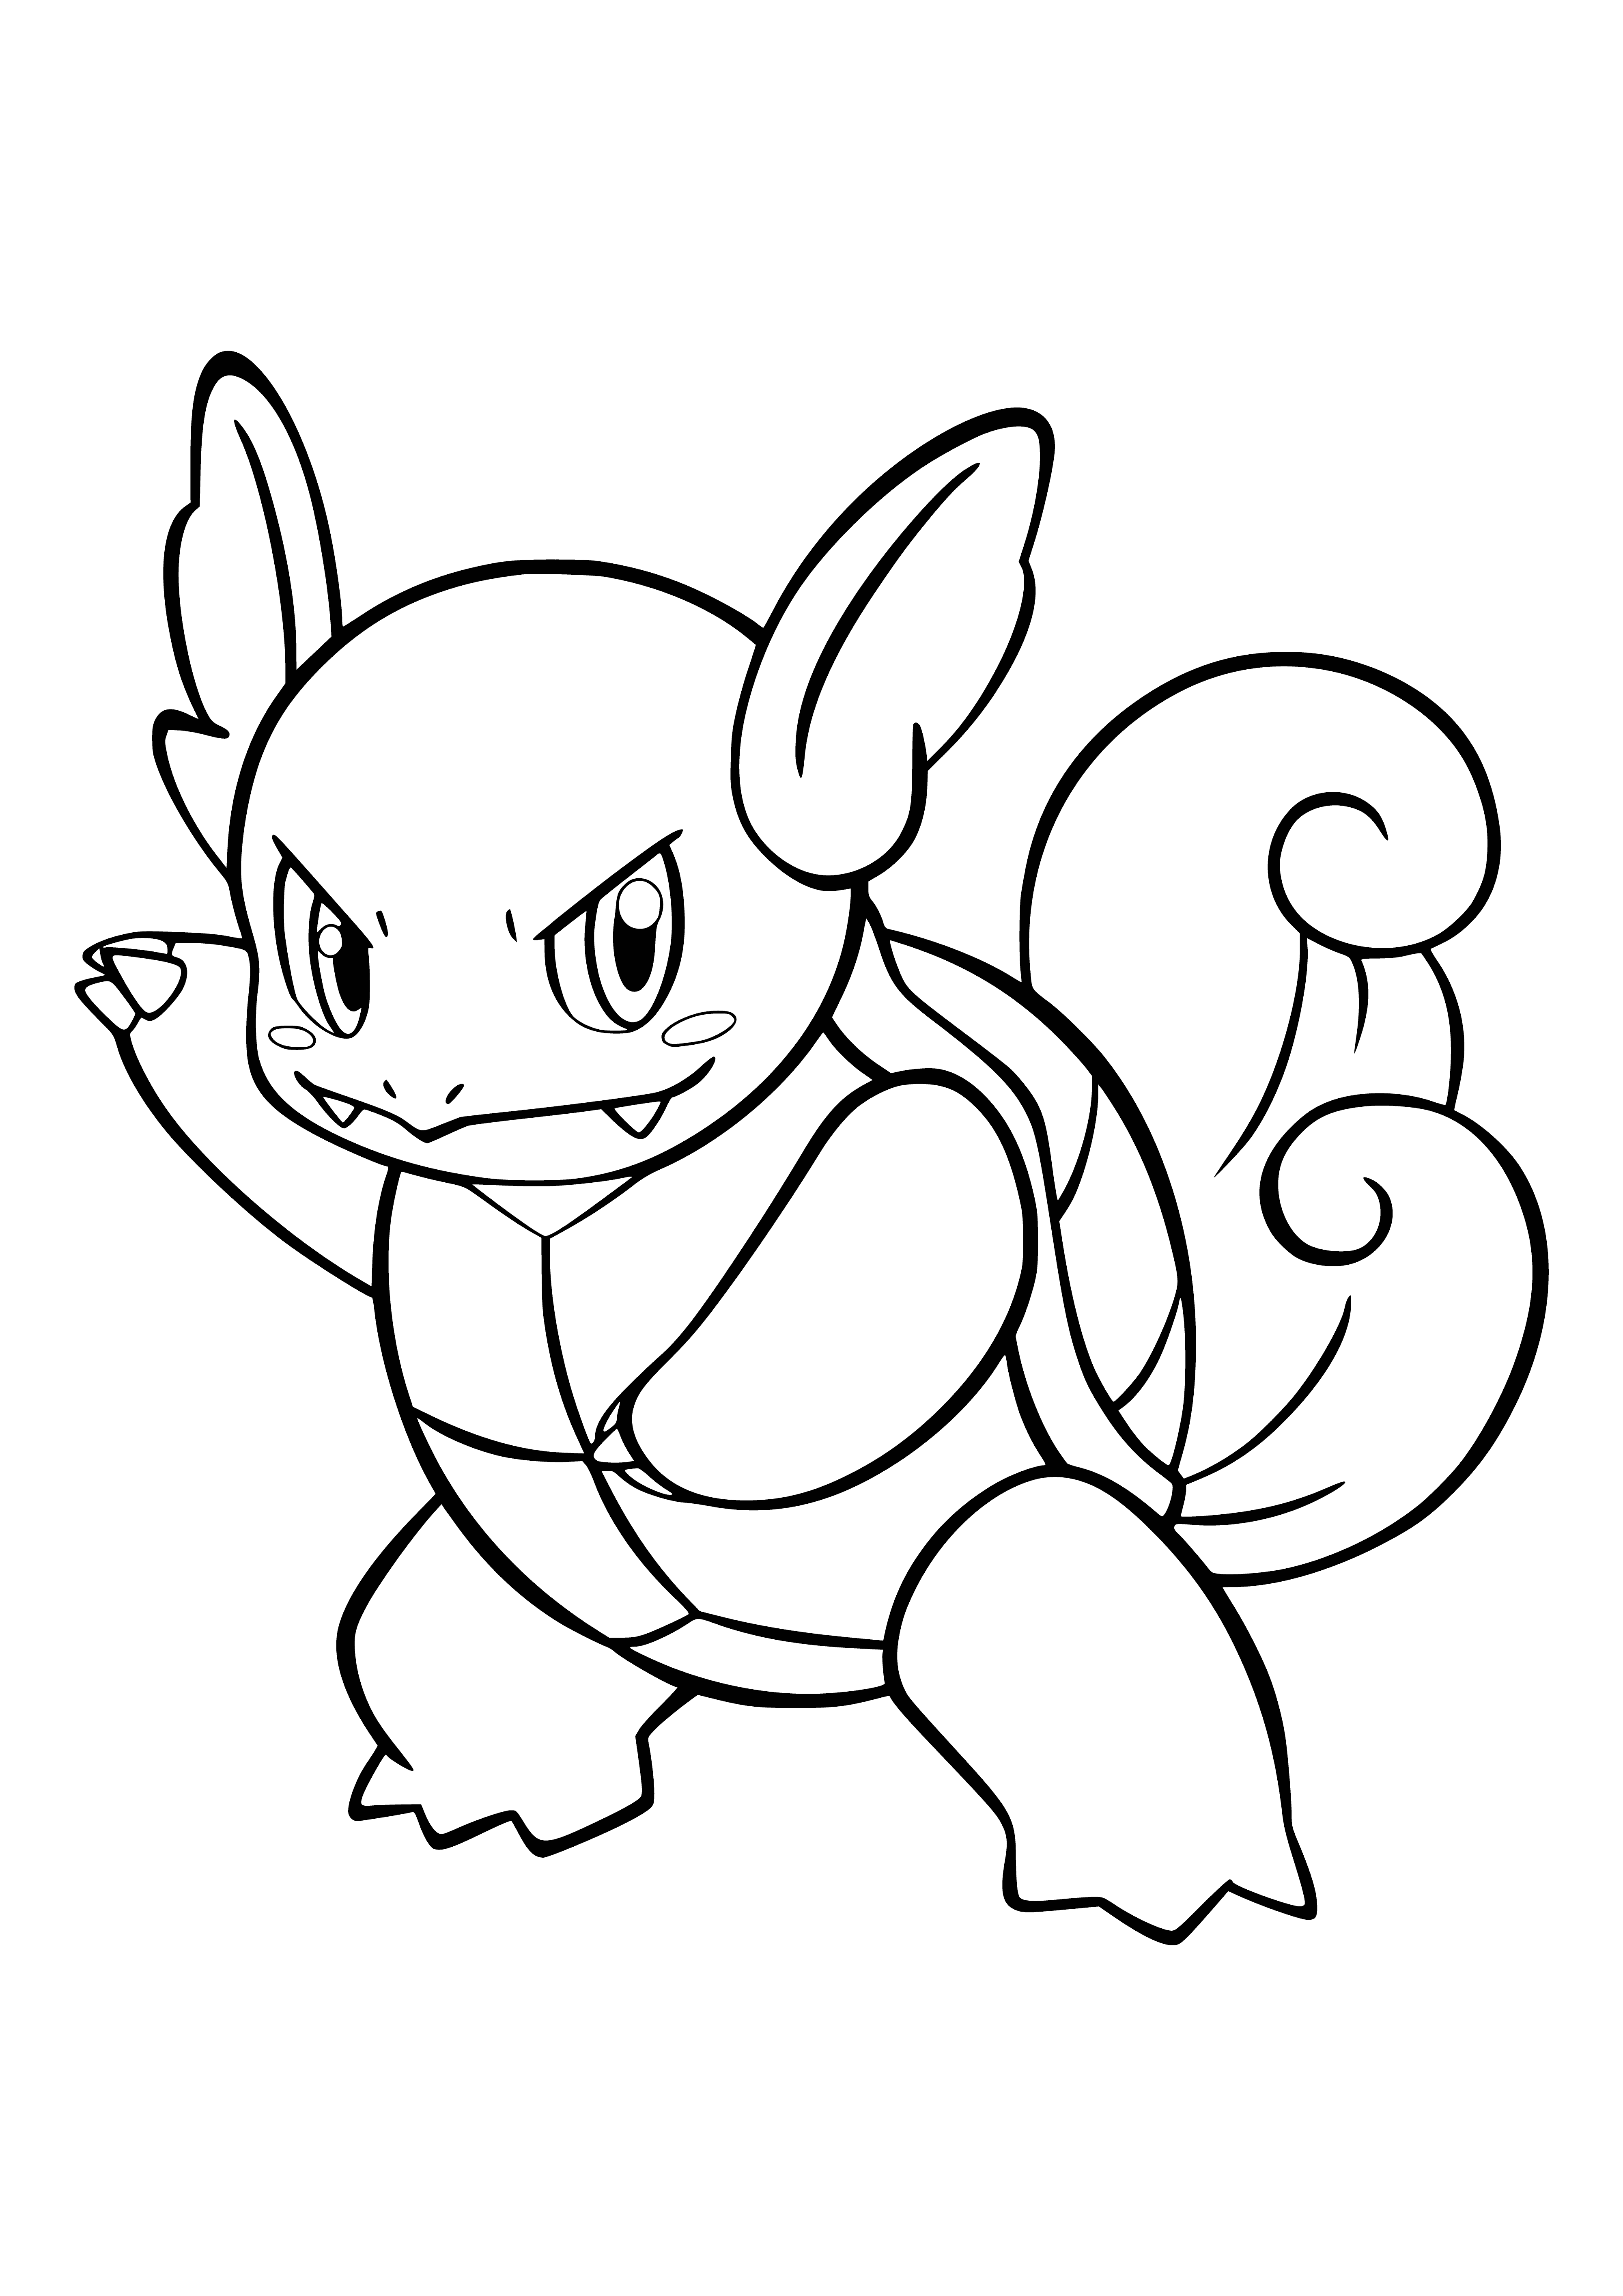 Pokemon Wartortle coloring page